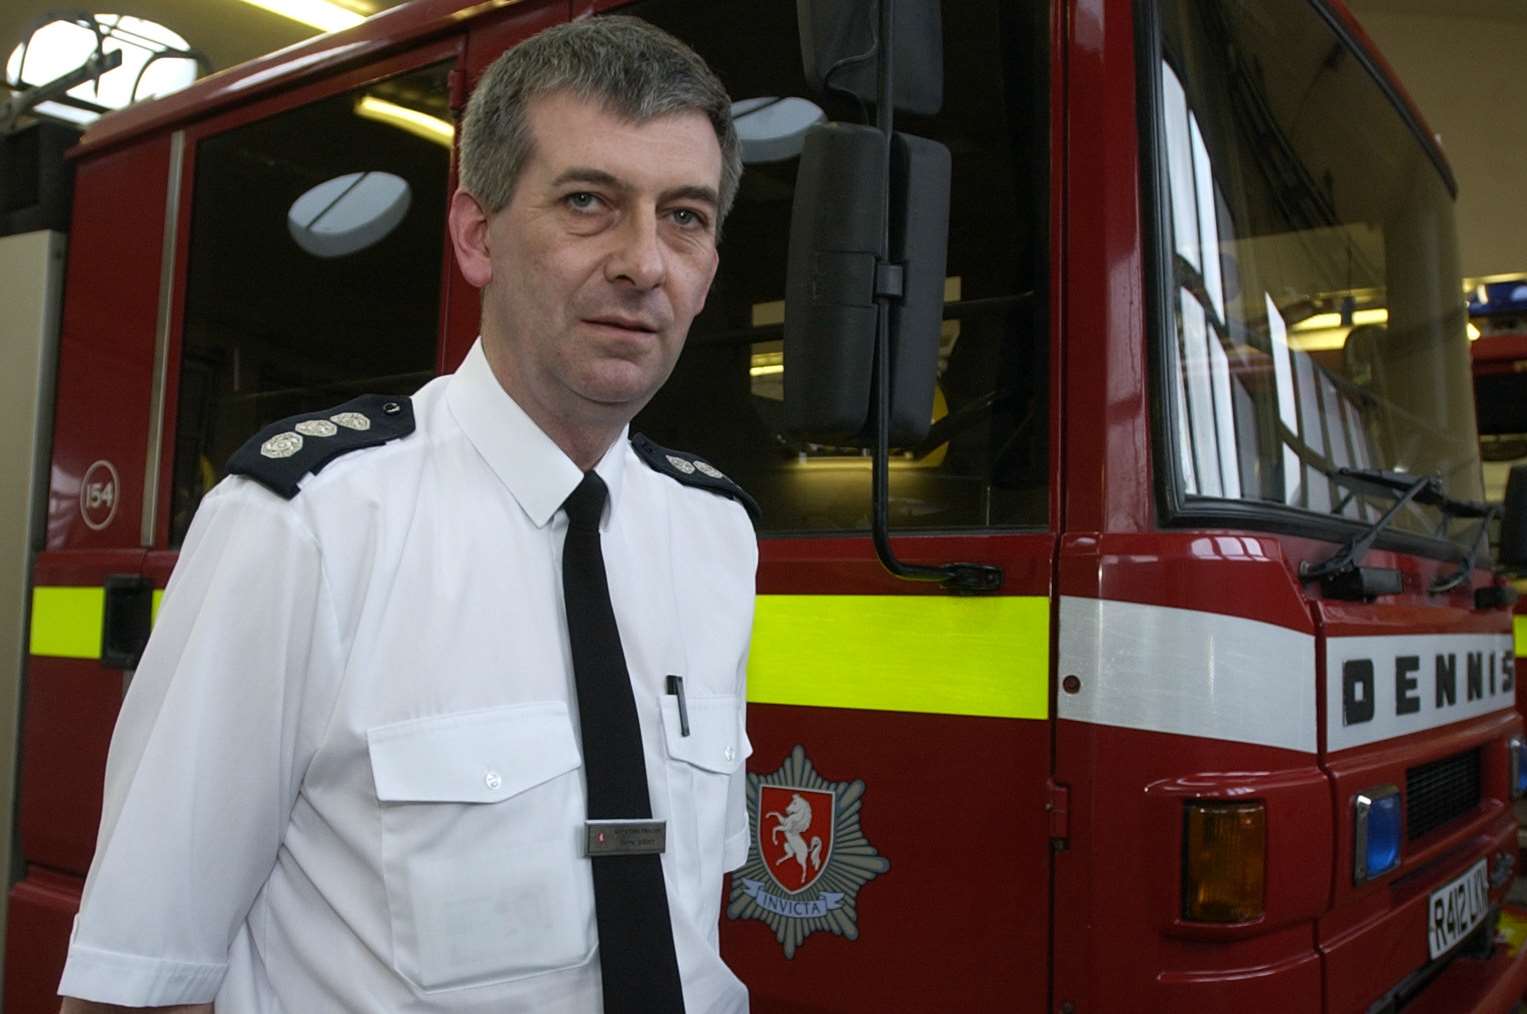 Steve Jeffery, from Kent Fire and Rescue Service